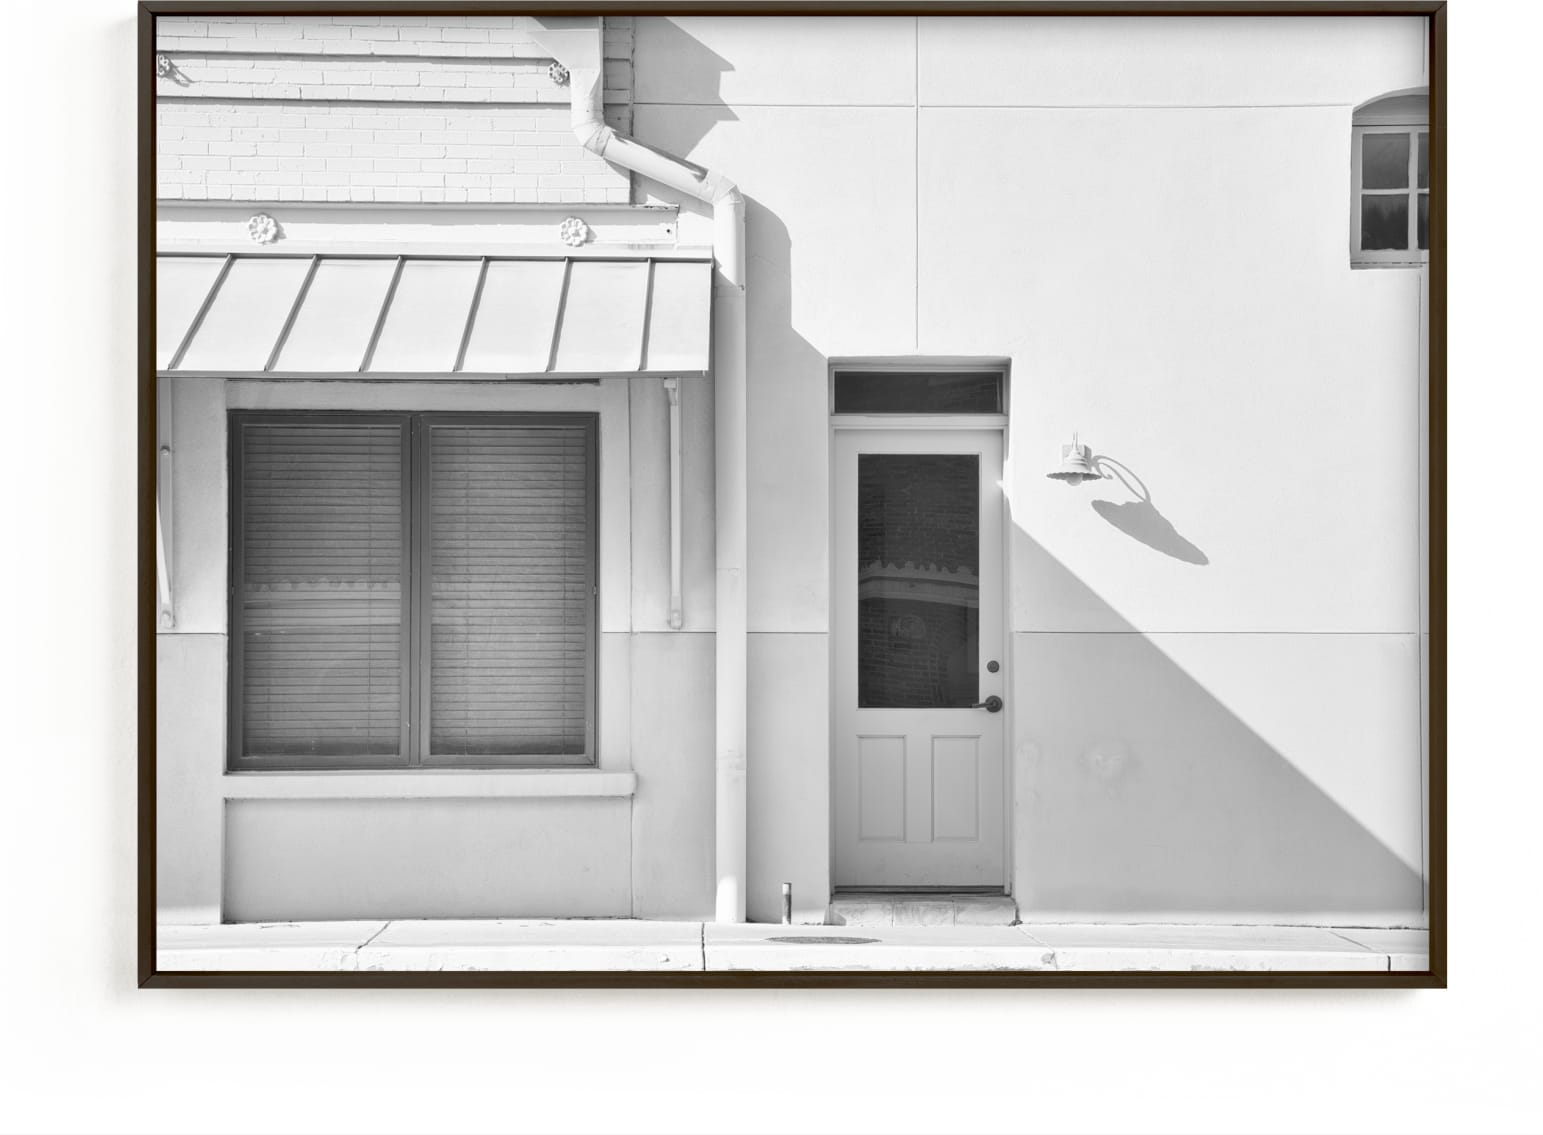 This is a black and white art by Carol Schiraldi called Cream Colored Building, Taylor, Texas.